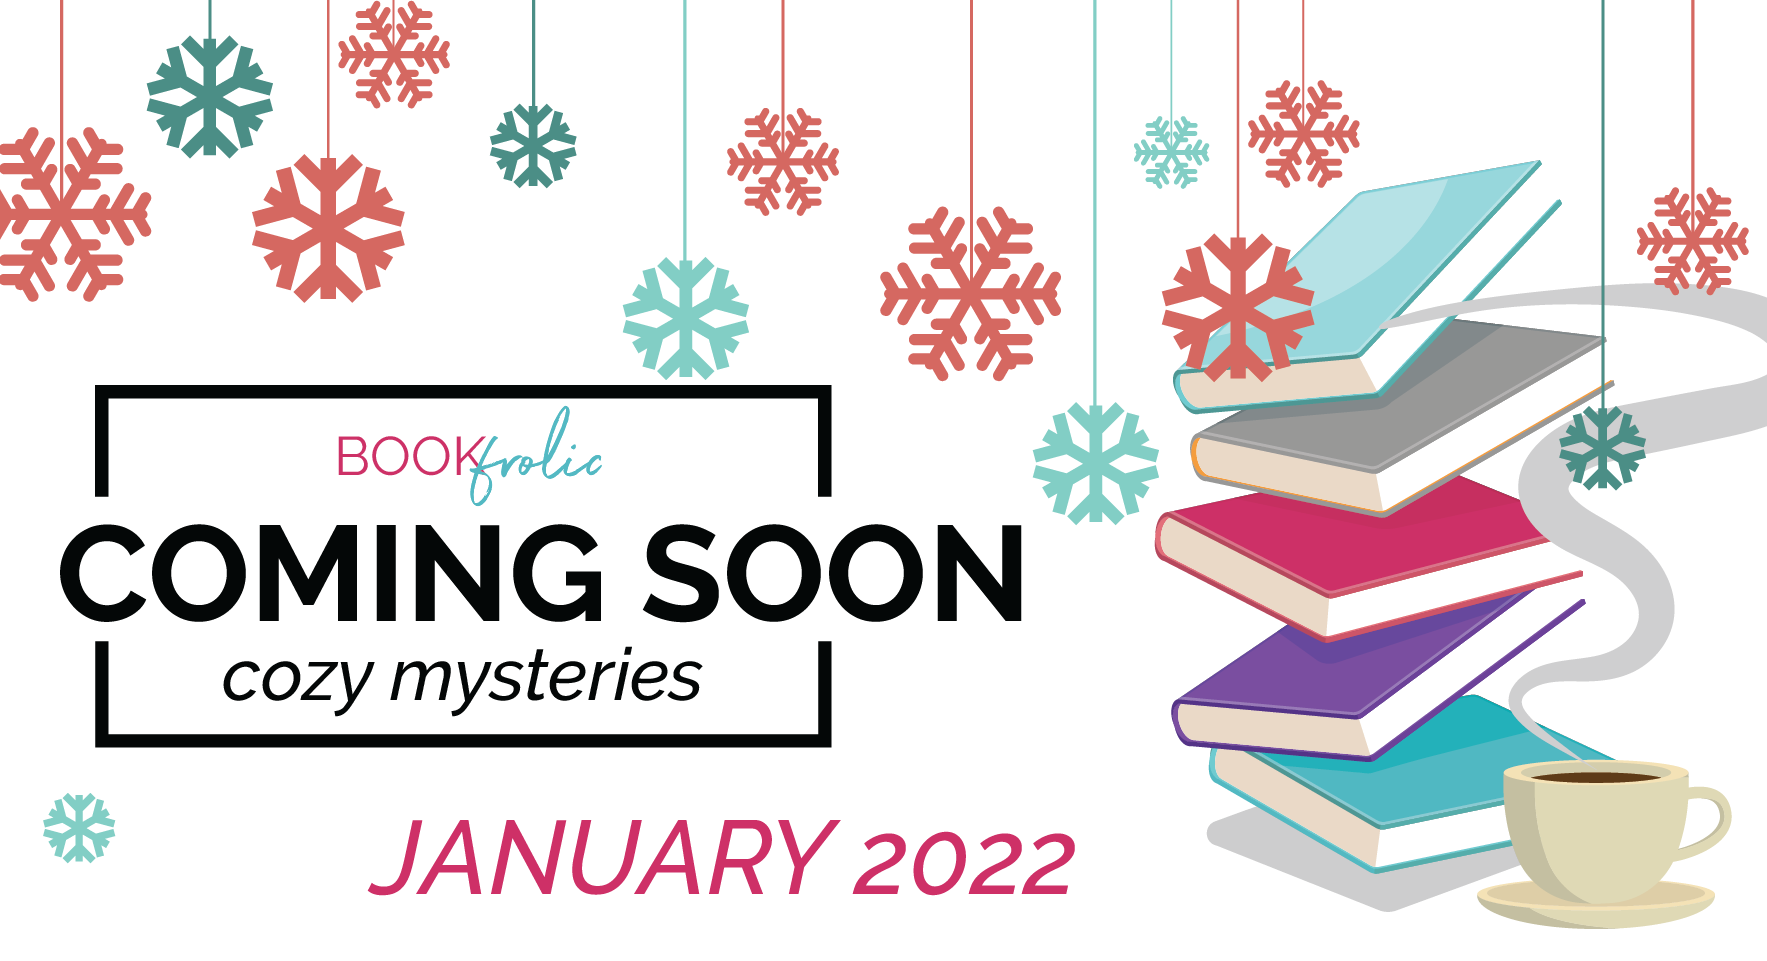 Coming soon - cozy mystery new releases for January 2022